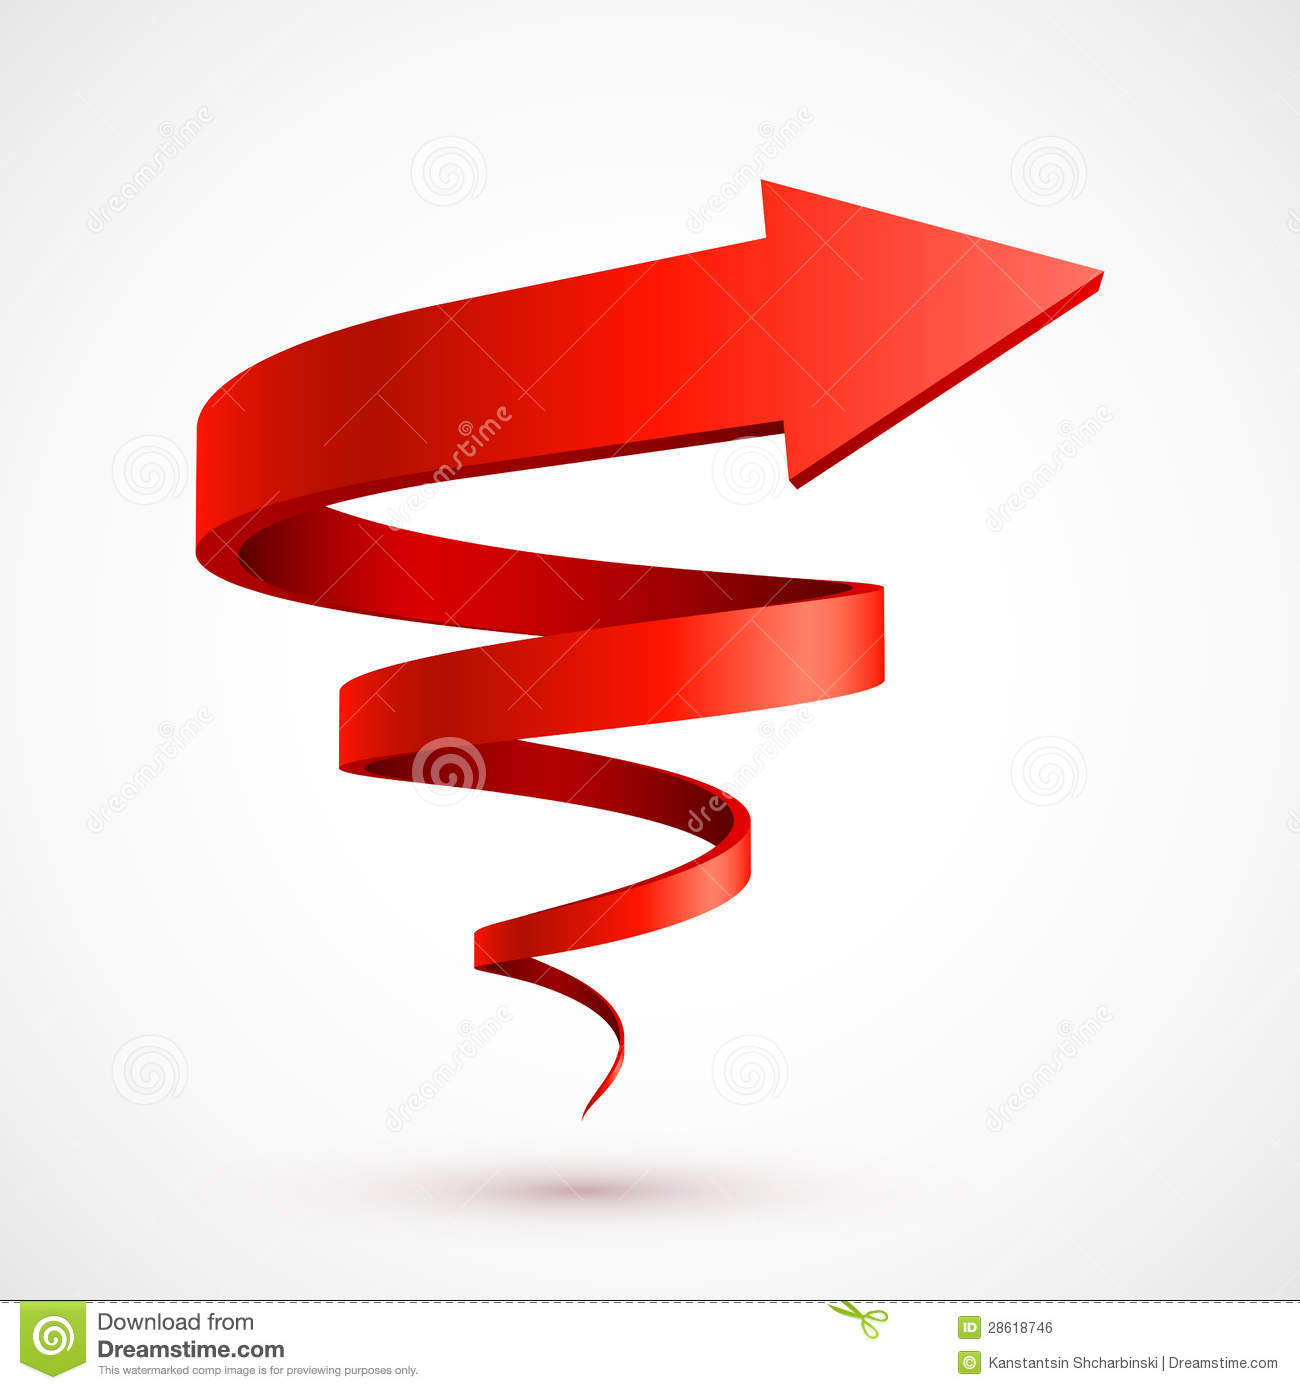 Red Spiral Arrow 3d Royalty Free Stock Image   Image  28618746